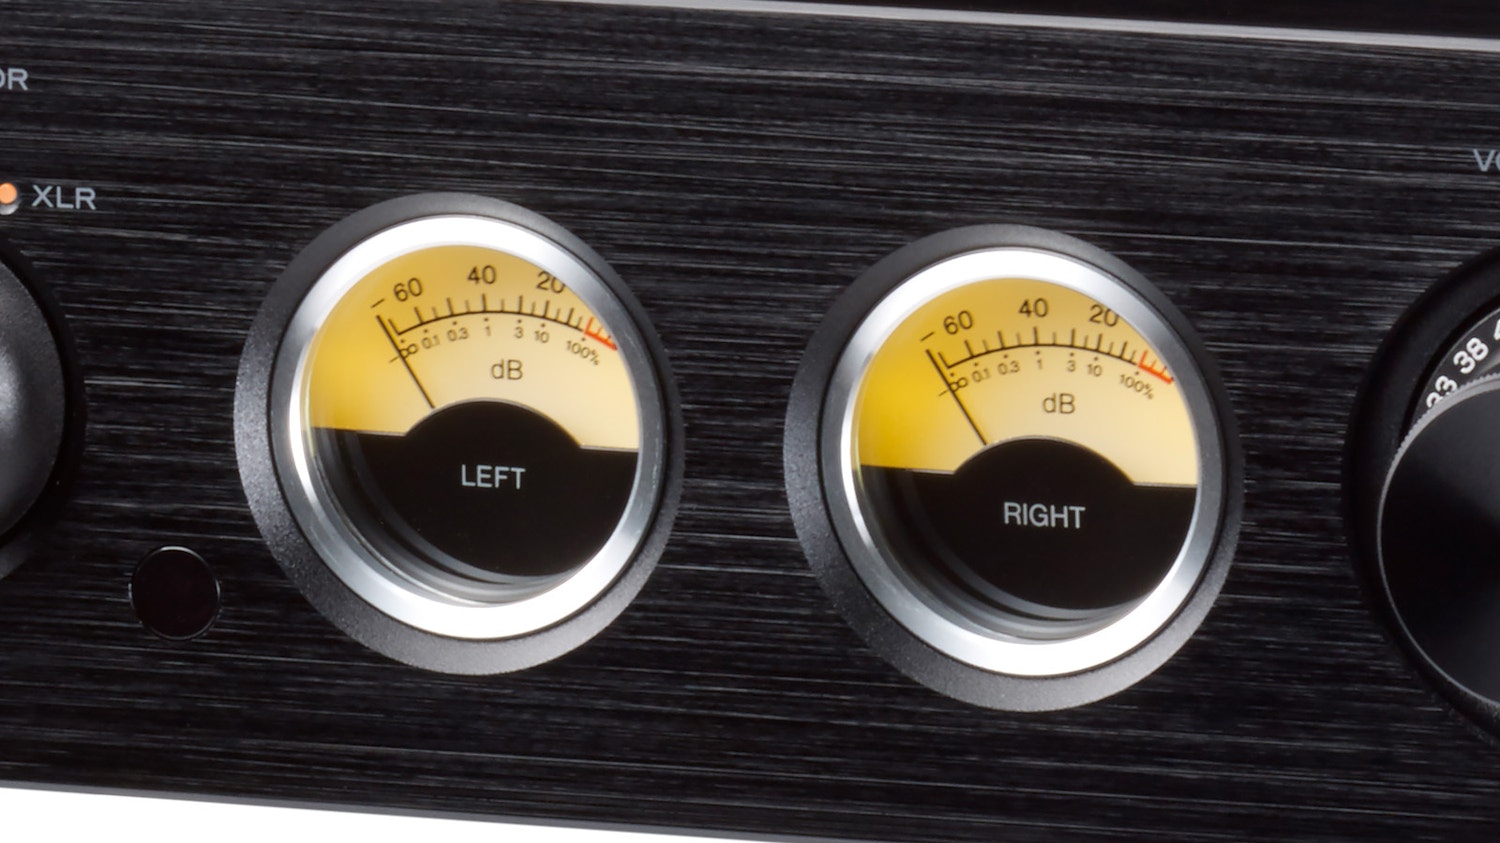 Ax 505 integrated amplifier left and right volume meters